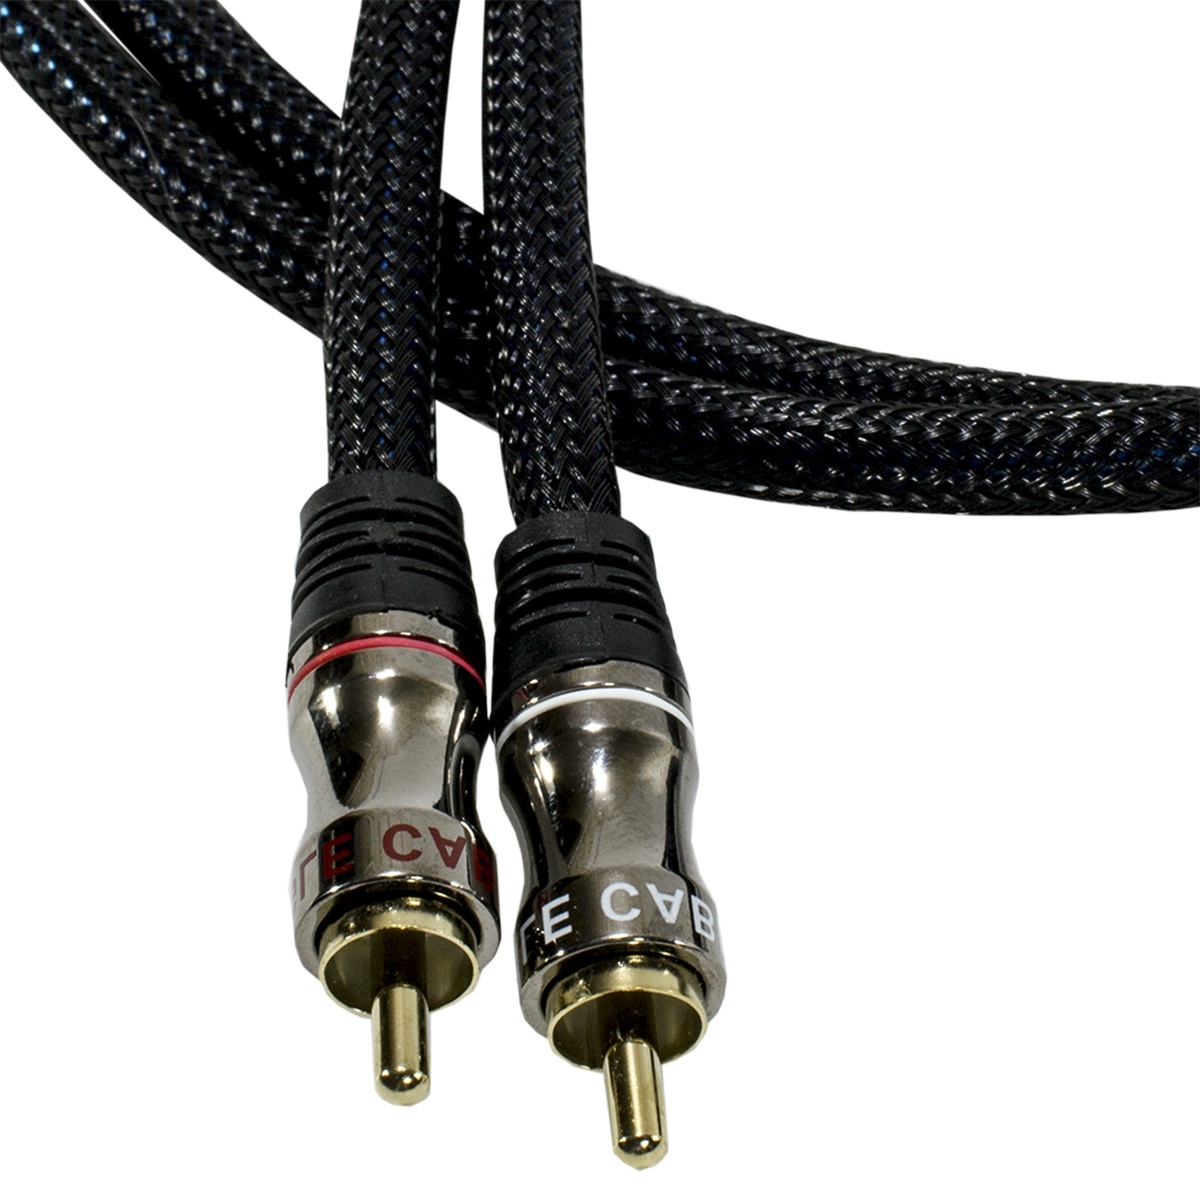 фото Кабель Eagle Cable Deluxe Stereo Audio 1,5 м